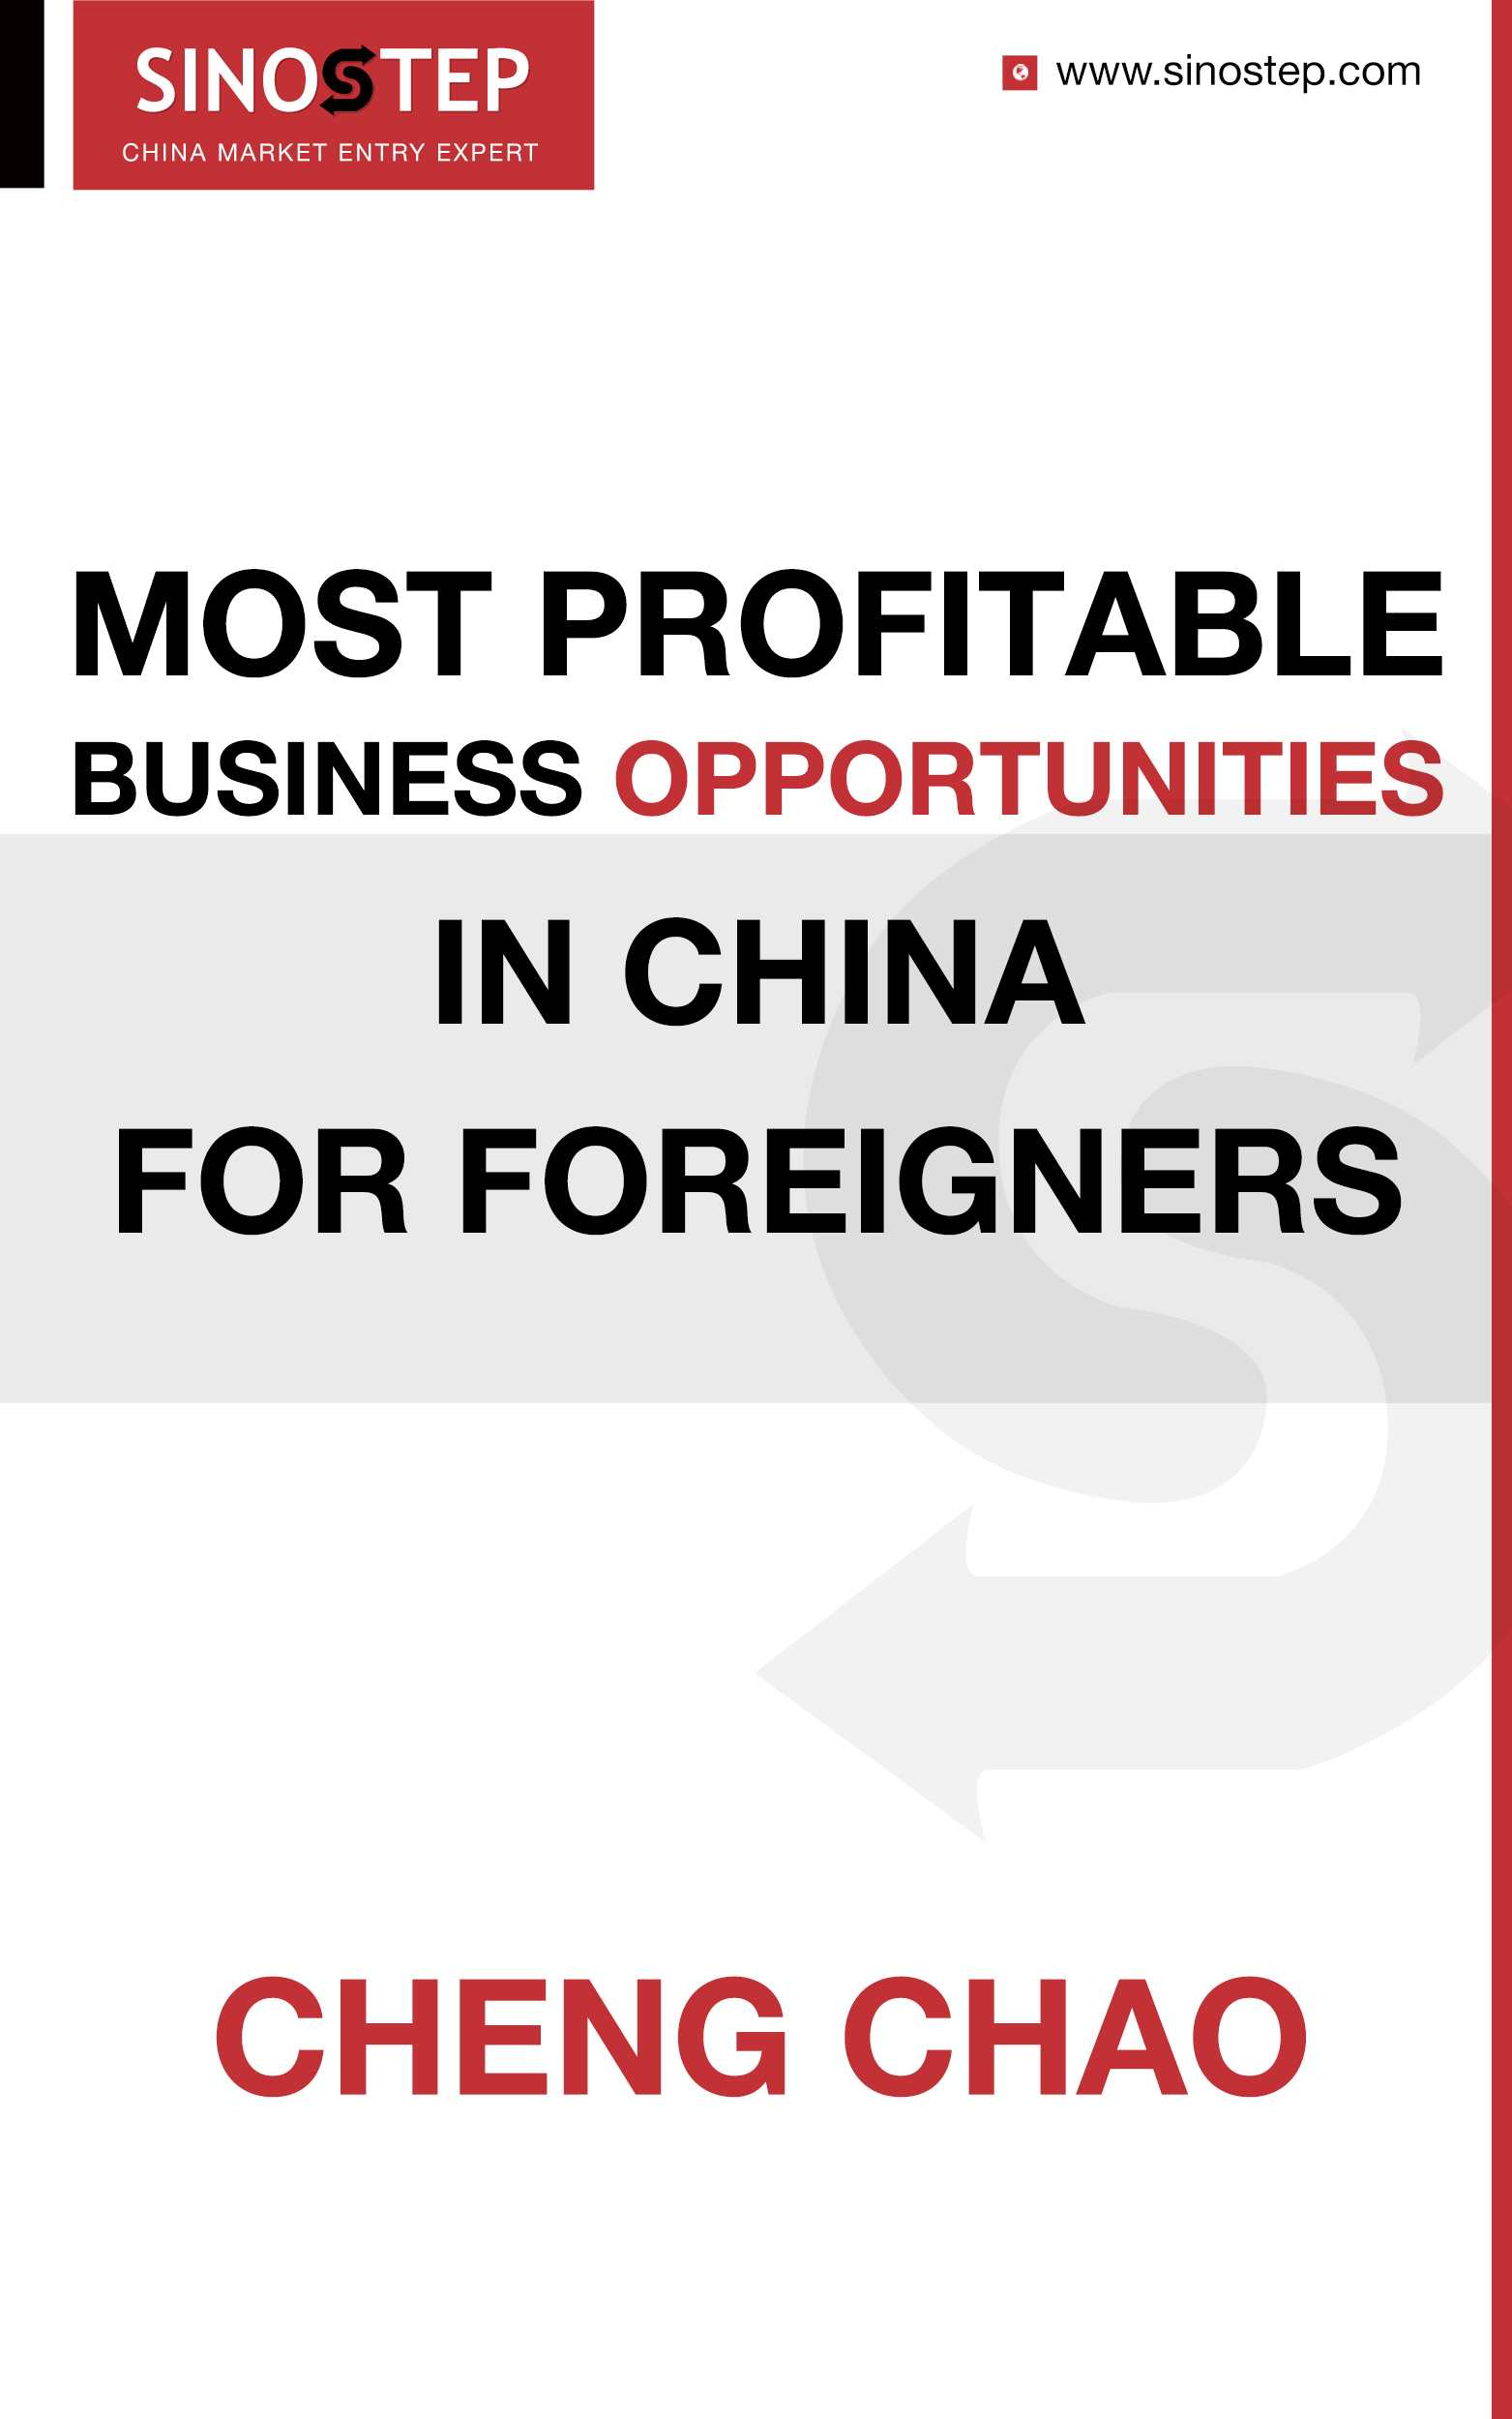 Most Profitable Business Opportunities in China for Foreigners